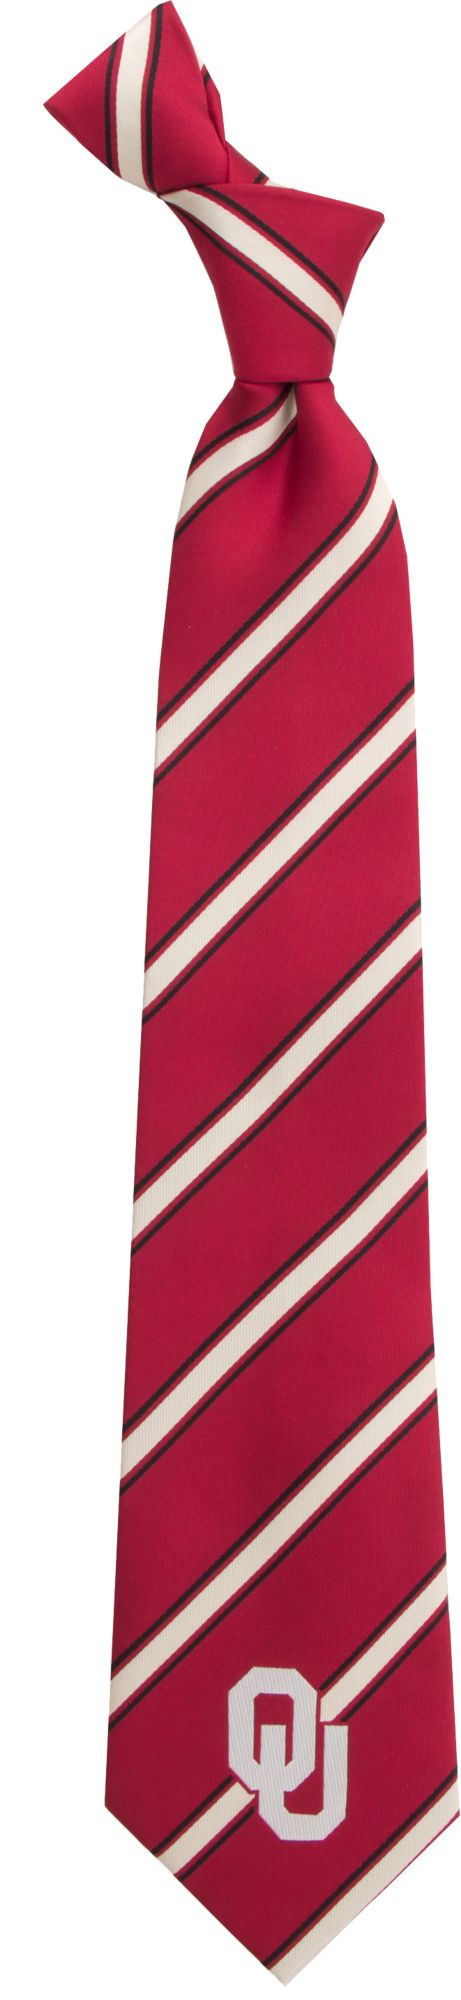 Eagles Wings Oklahoma Sooners Woven Poly 1 Necktie